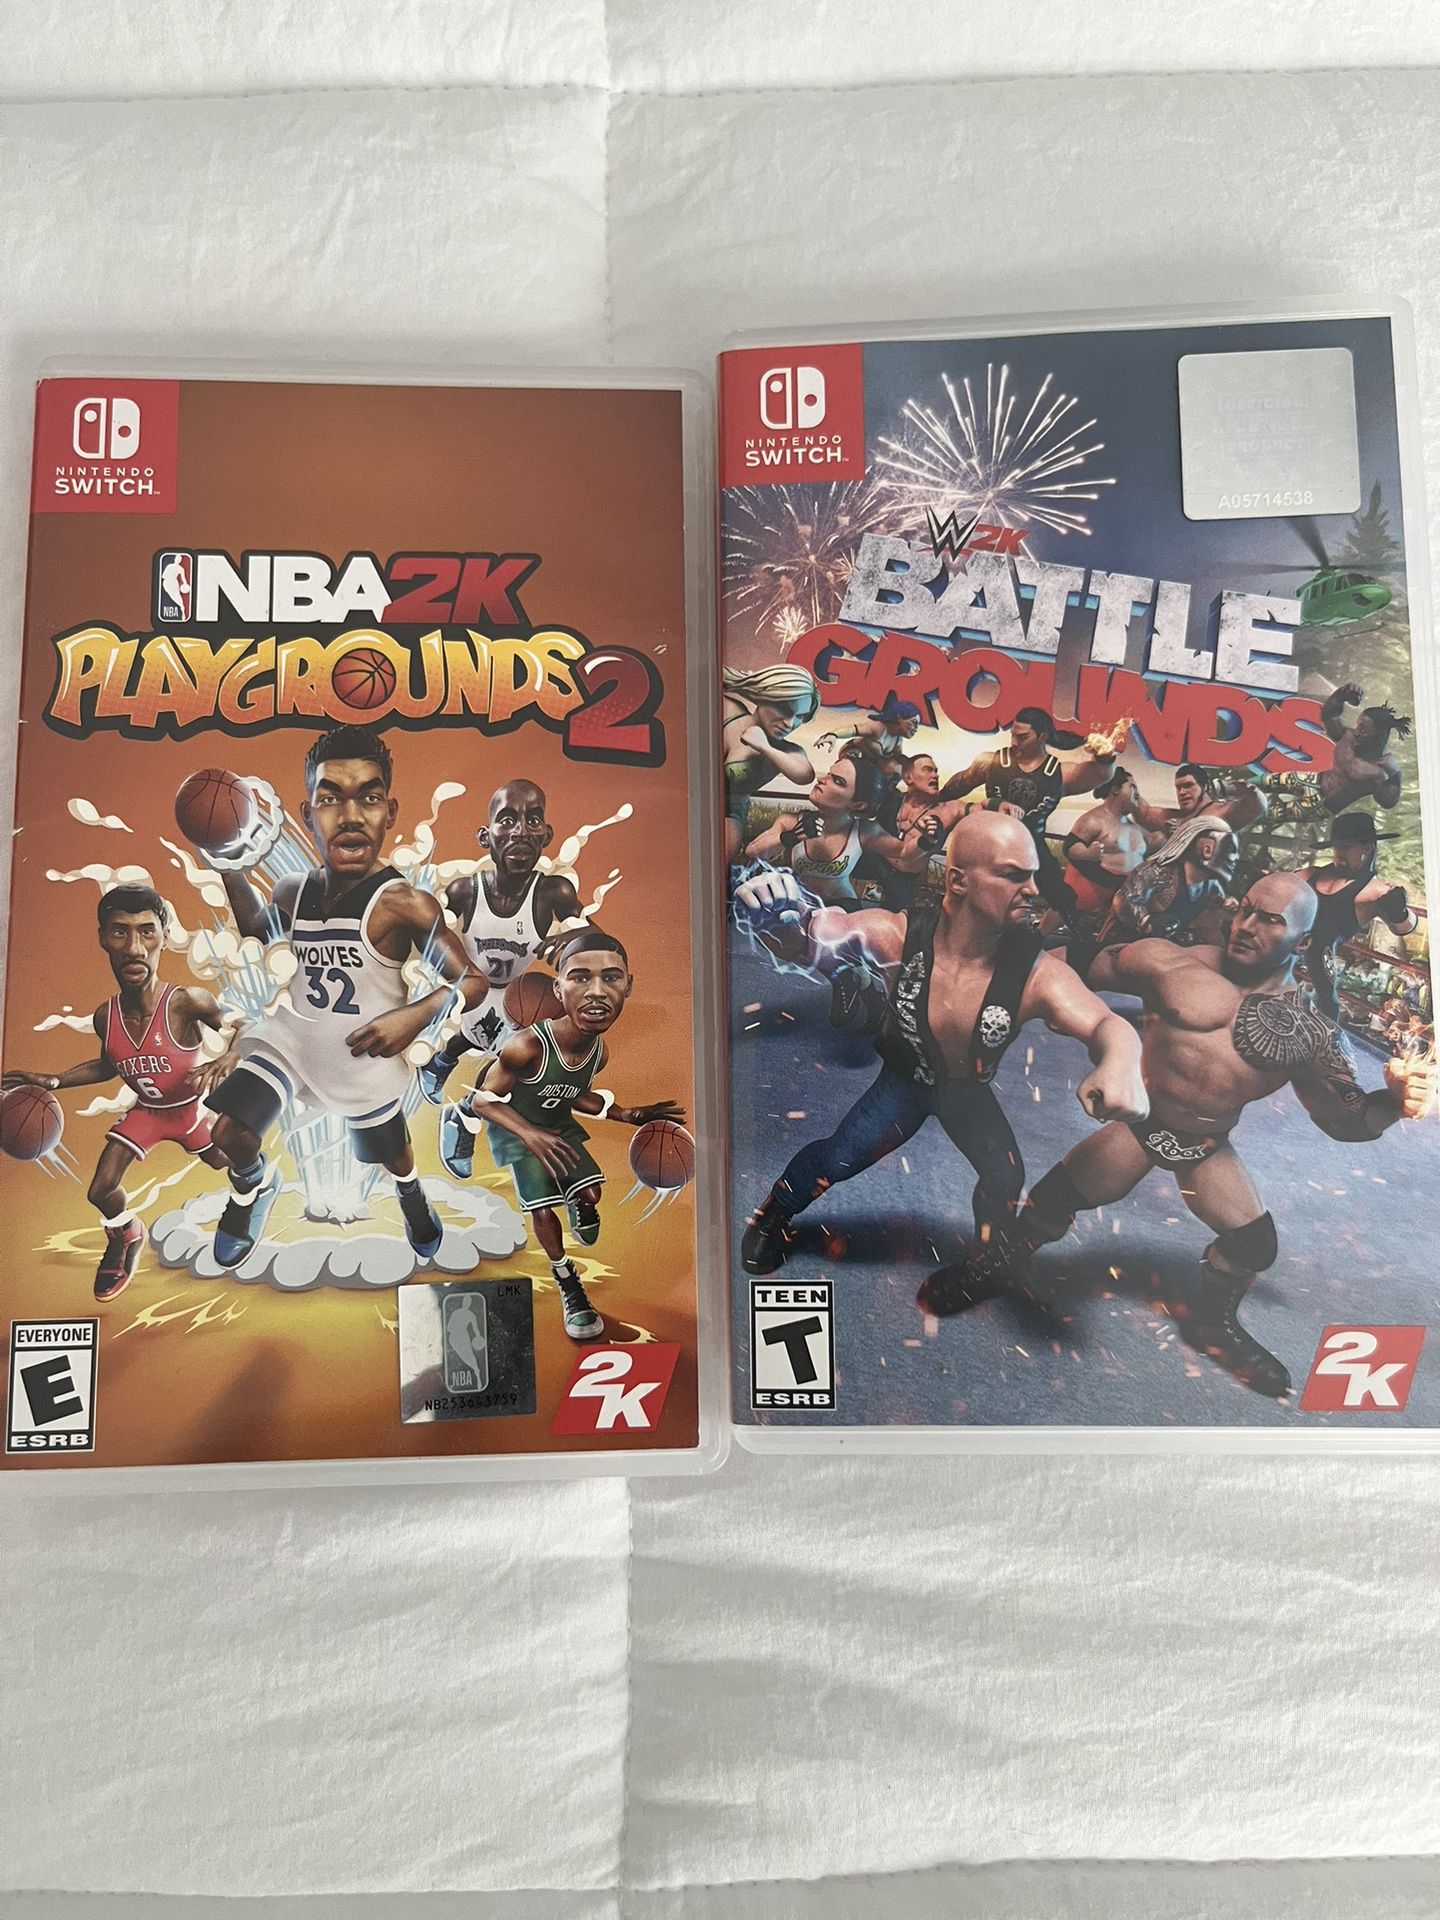 Nintendo Switch Video Game Both For $15